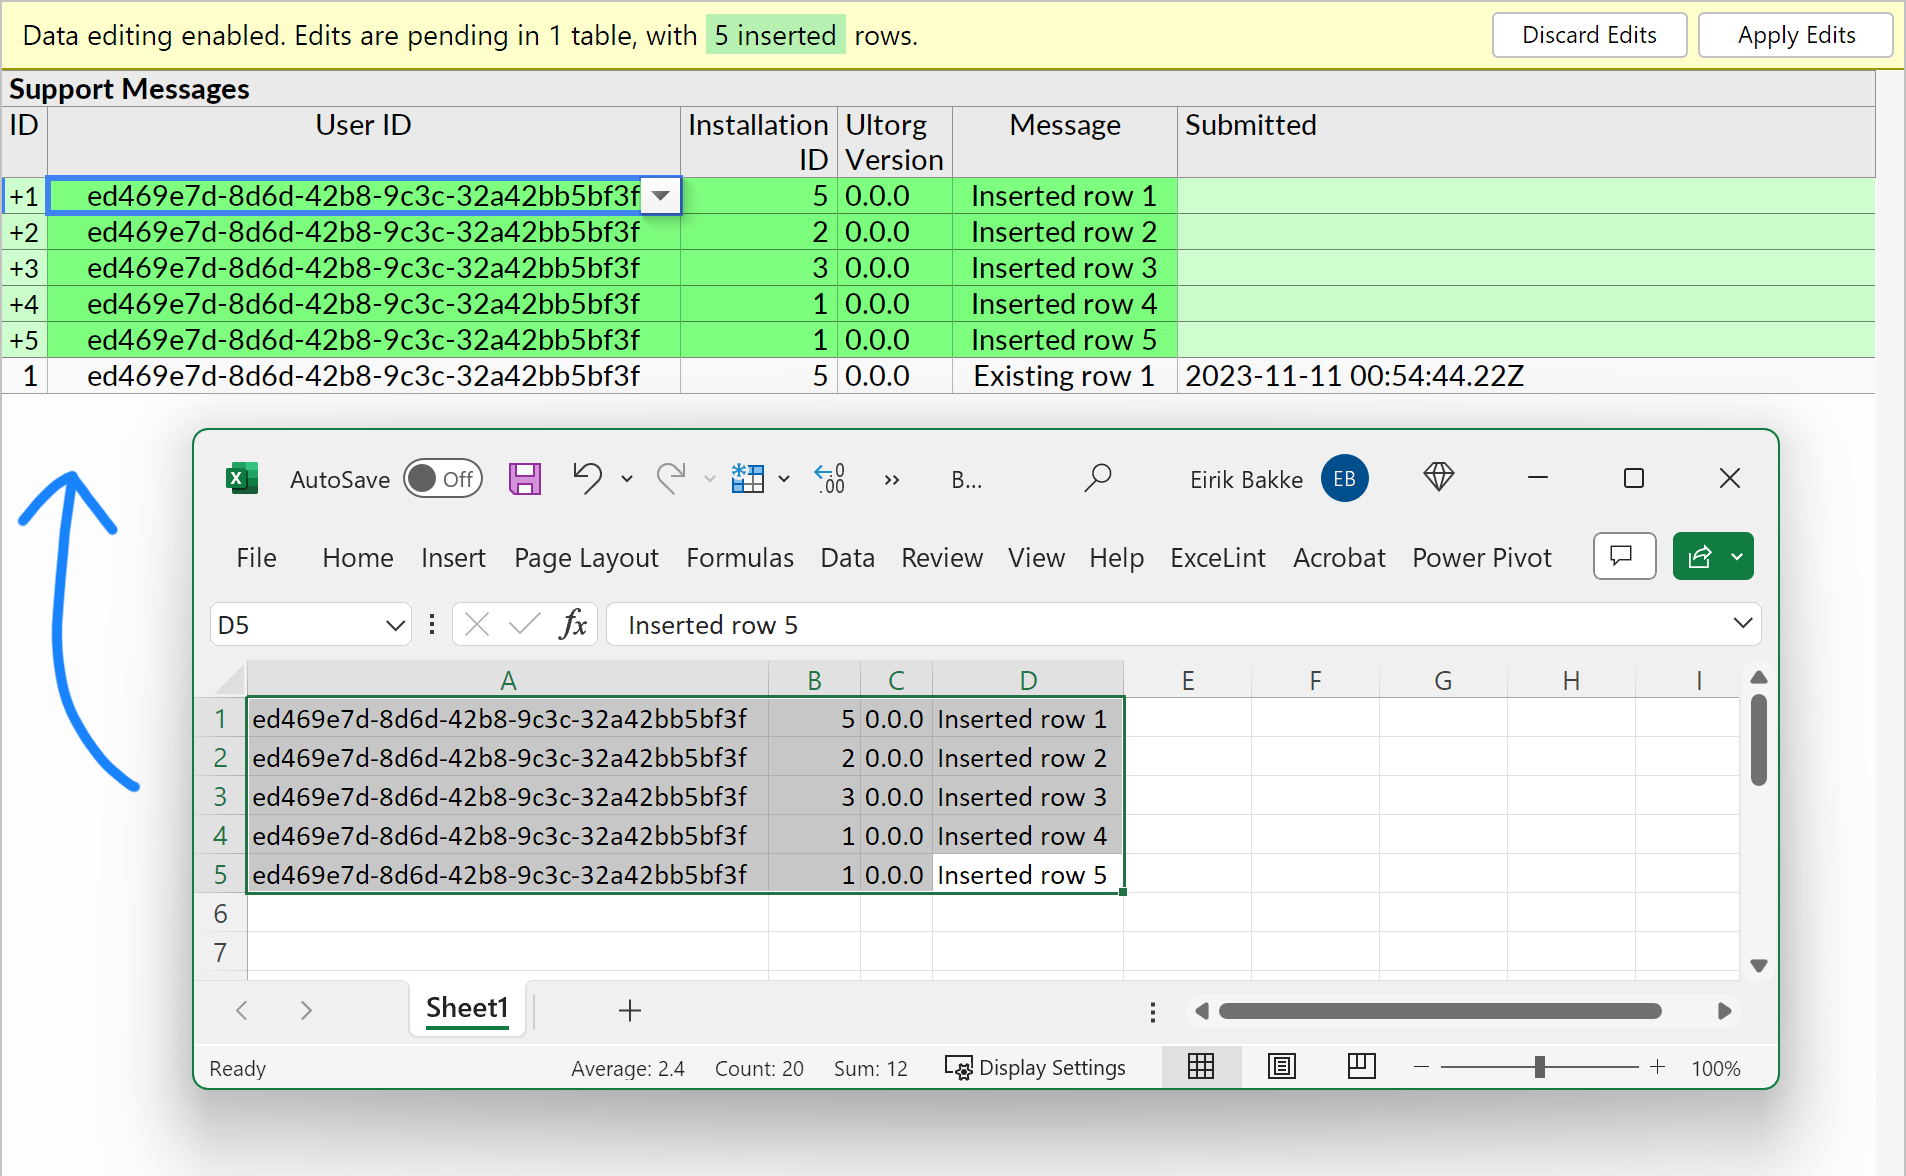 Illustration of bulk copy-of-paste from Excel to Ultorg, creating new rows pending insertion.